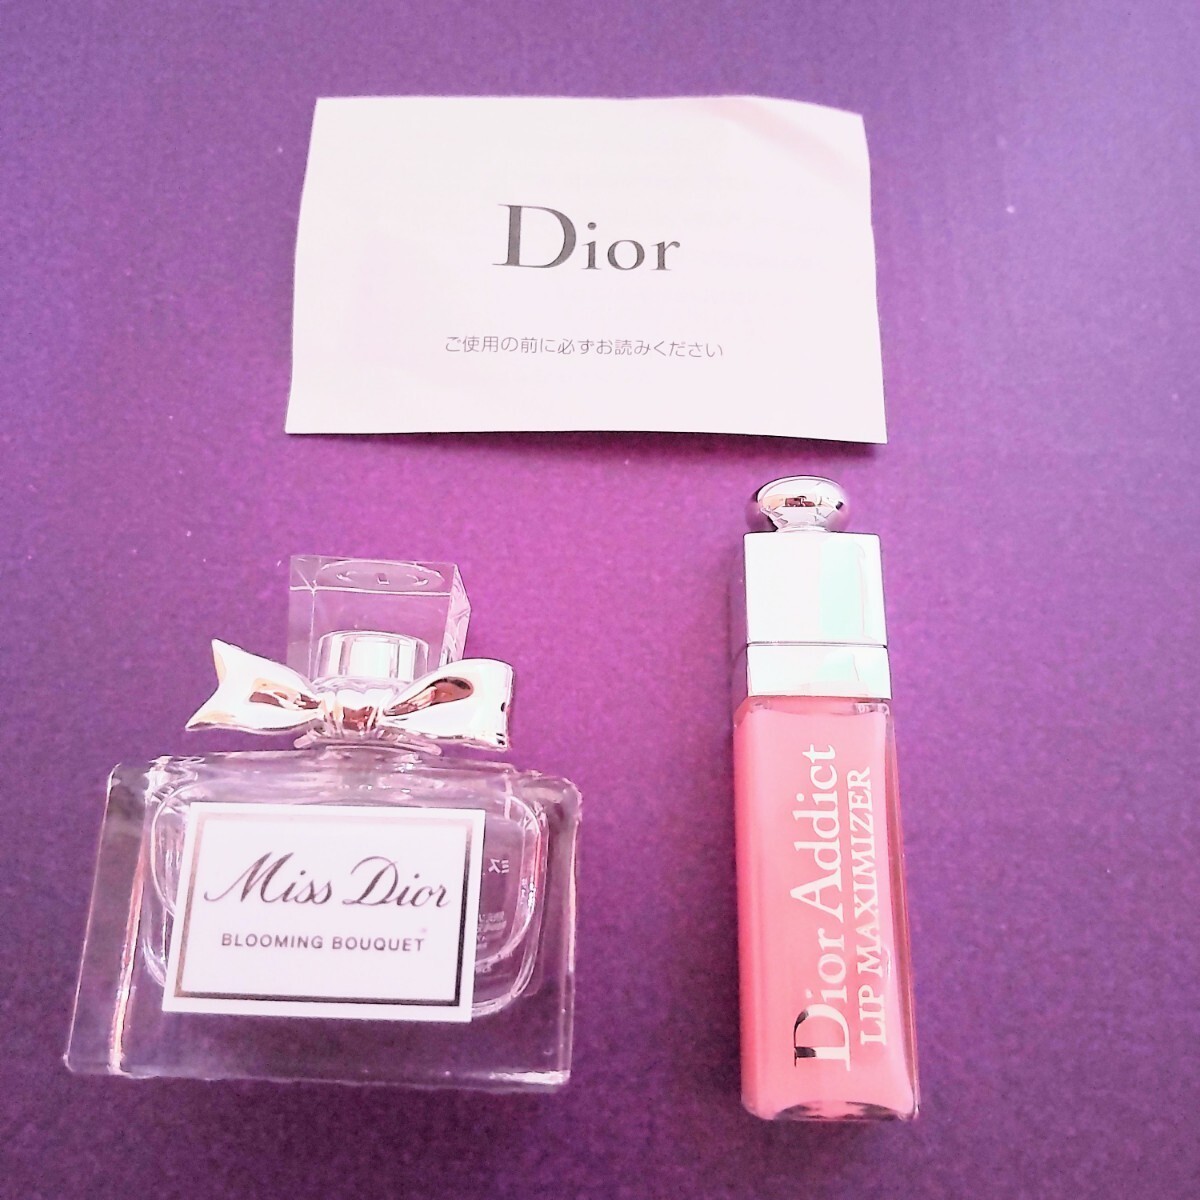  Christian Dior pouch CD Dior make-up pouch perfume lip gloss unused 